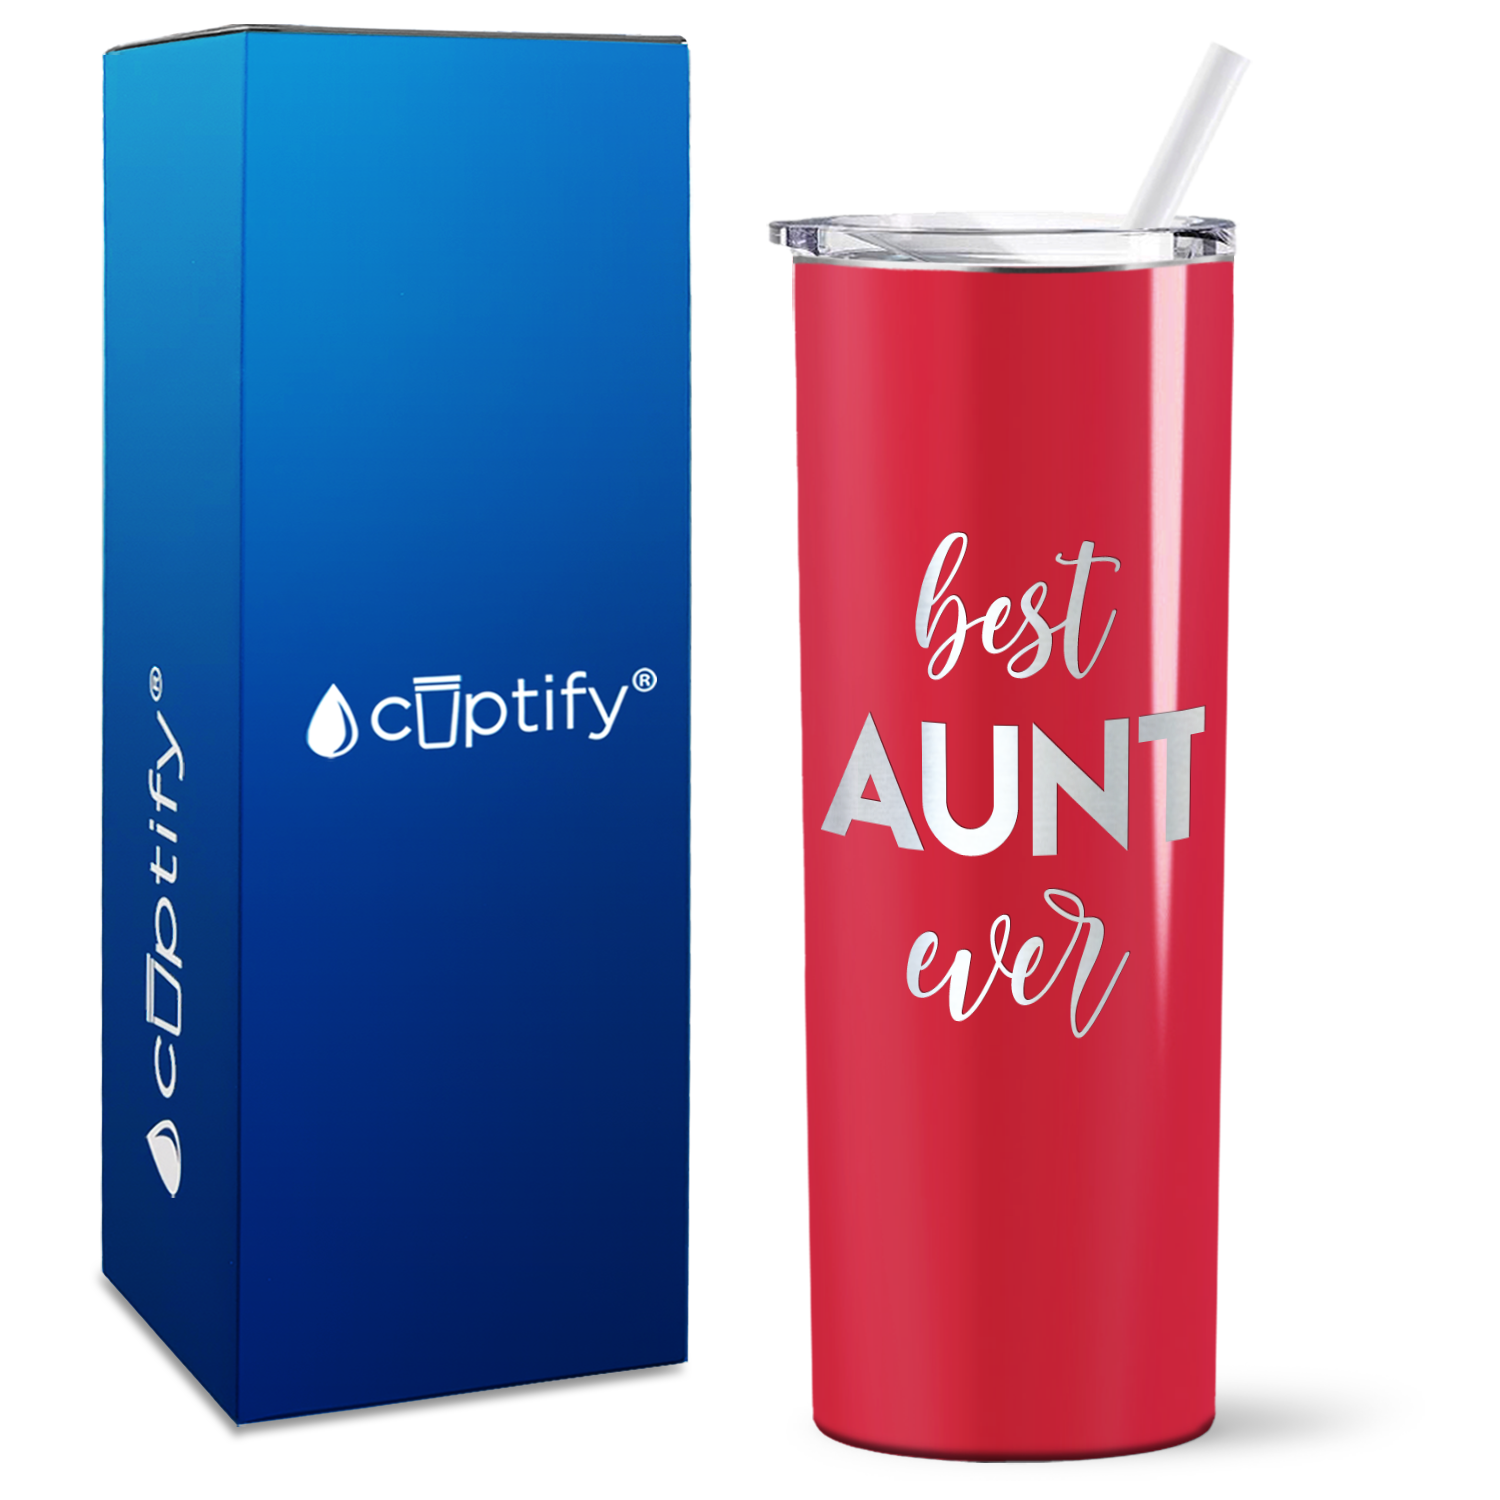 Tumblers for Women - Cuptify